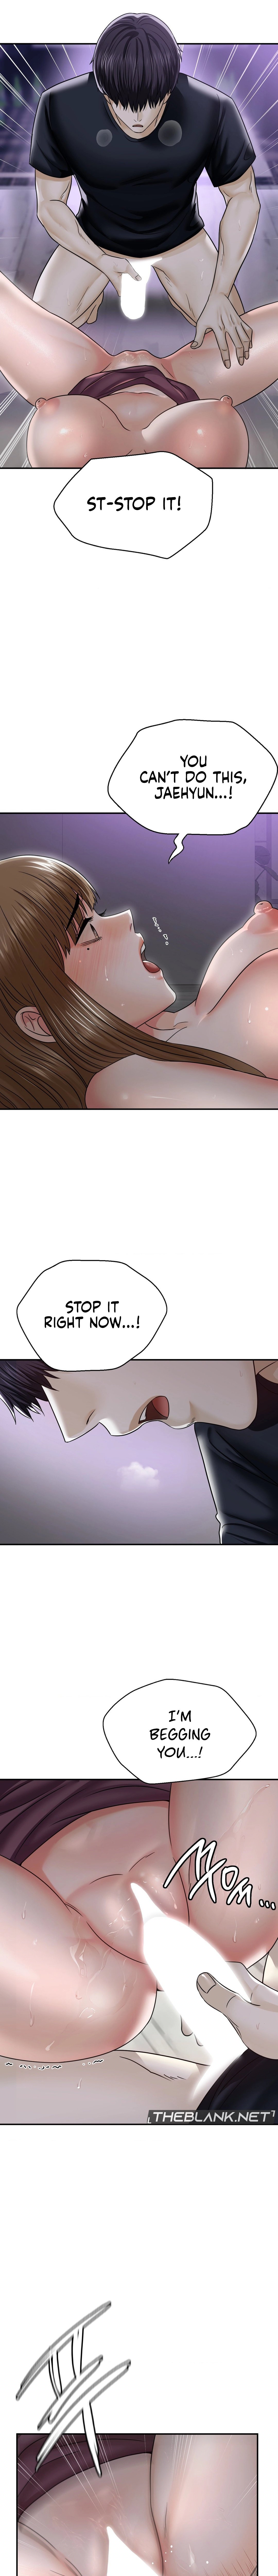 stepmothers-past-chap-3-17